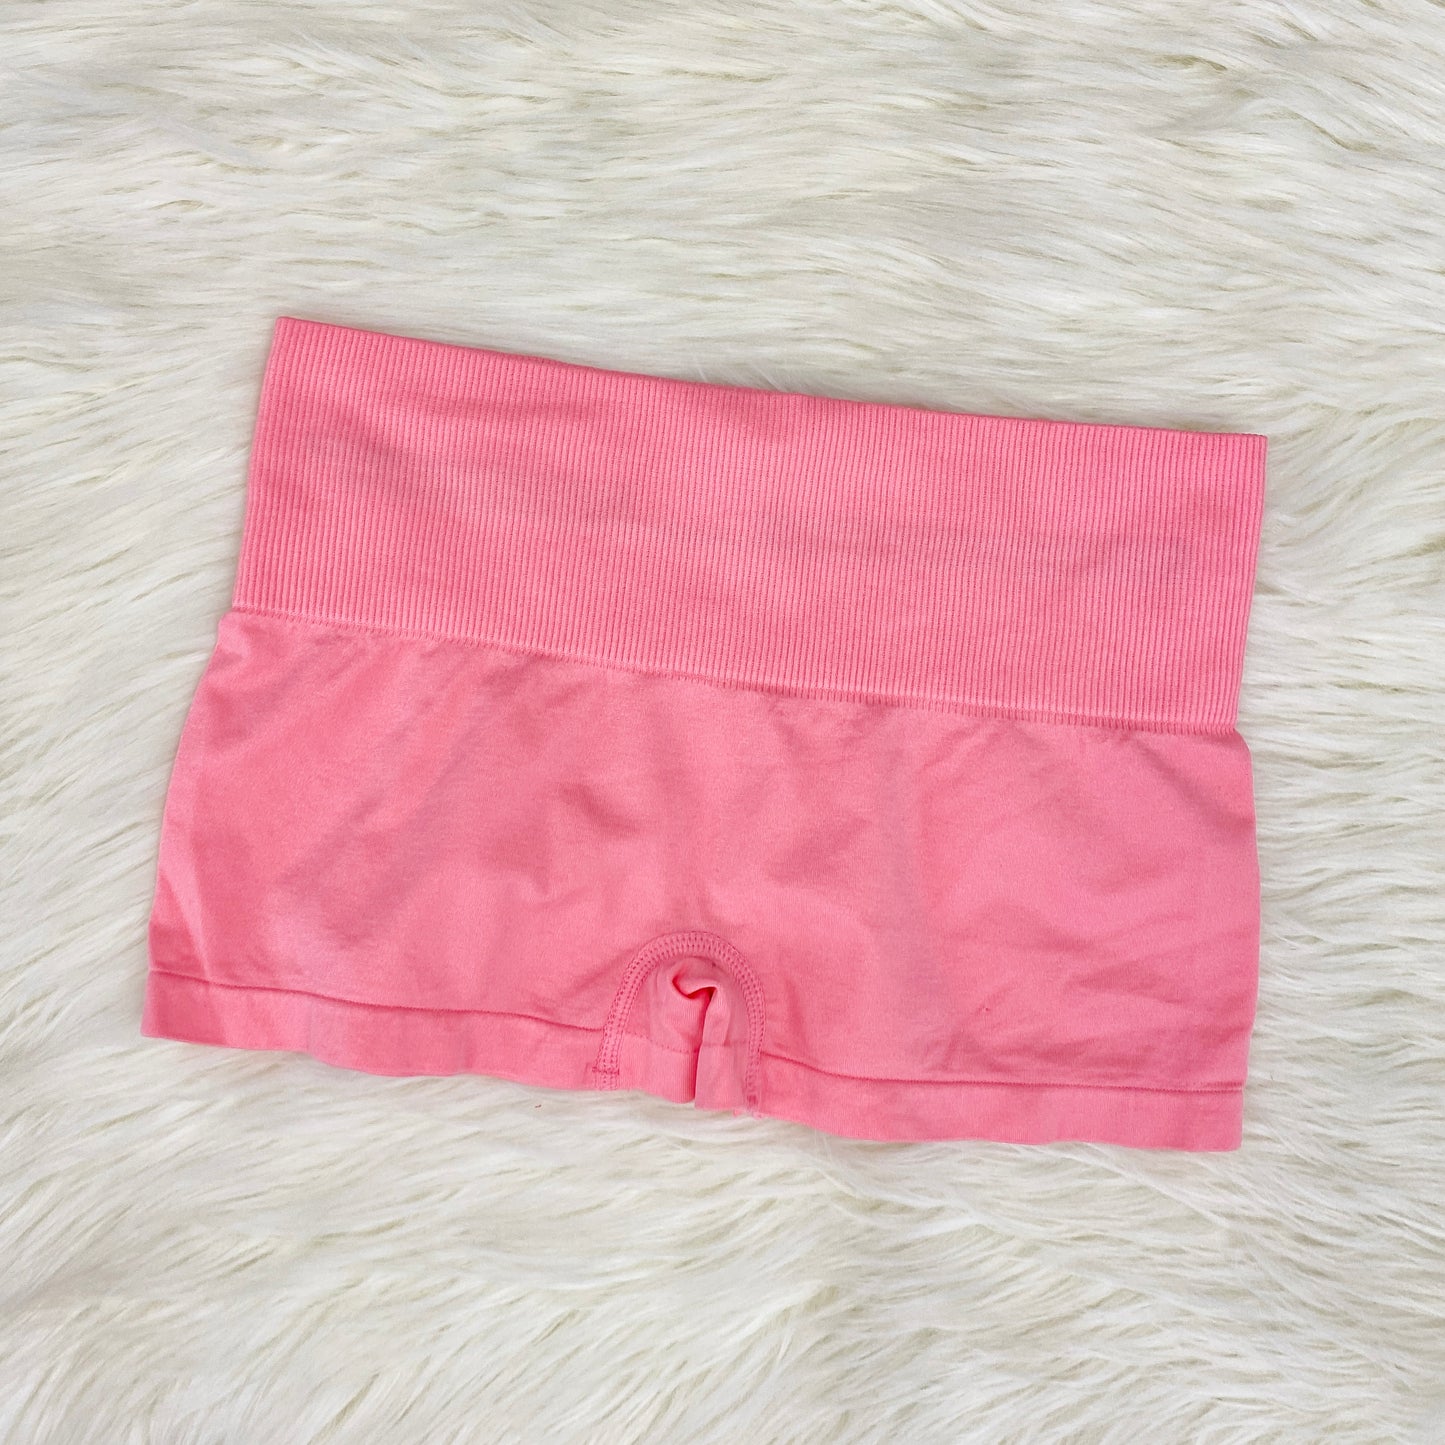 The wider side panels offer additional coverage and support, making them suitable for various activities and lifestyles. Whether you're going to work, hitting the gym, or simply lounging at home, these panties will keep you comfortable and confident throughout the day.